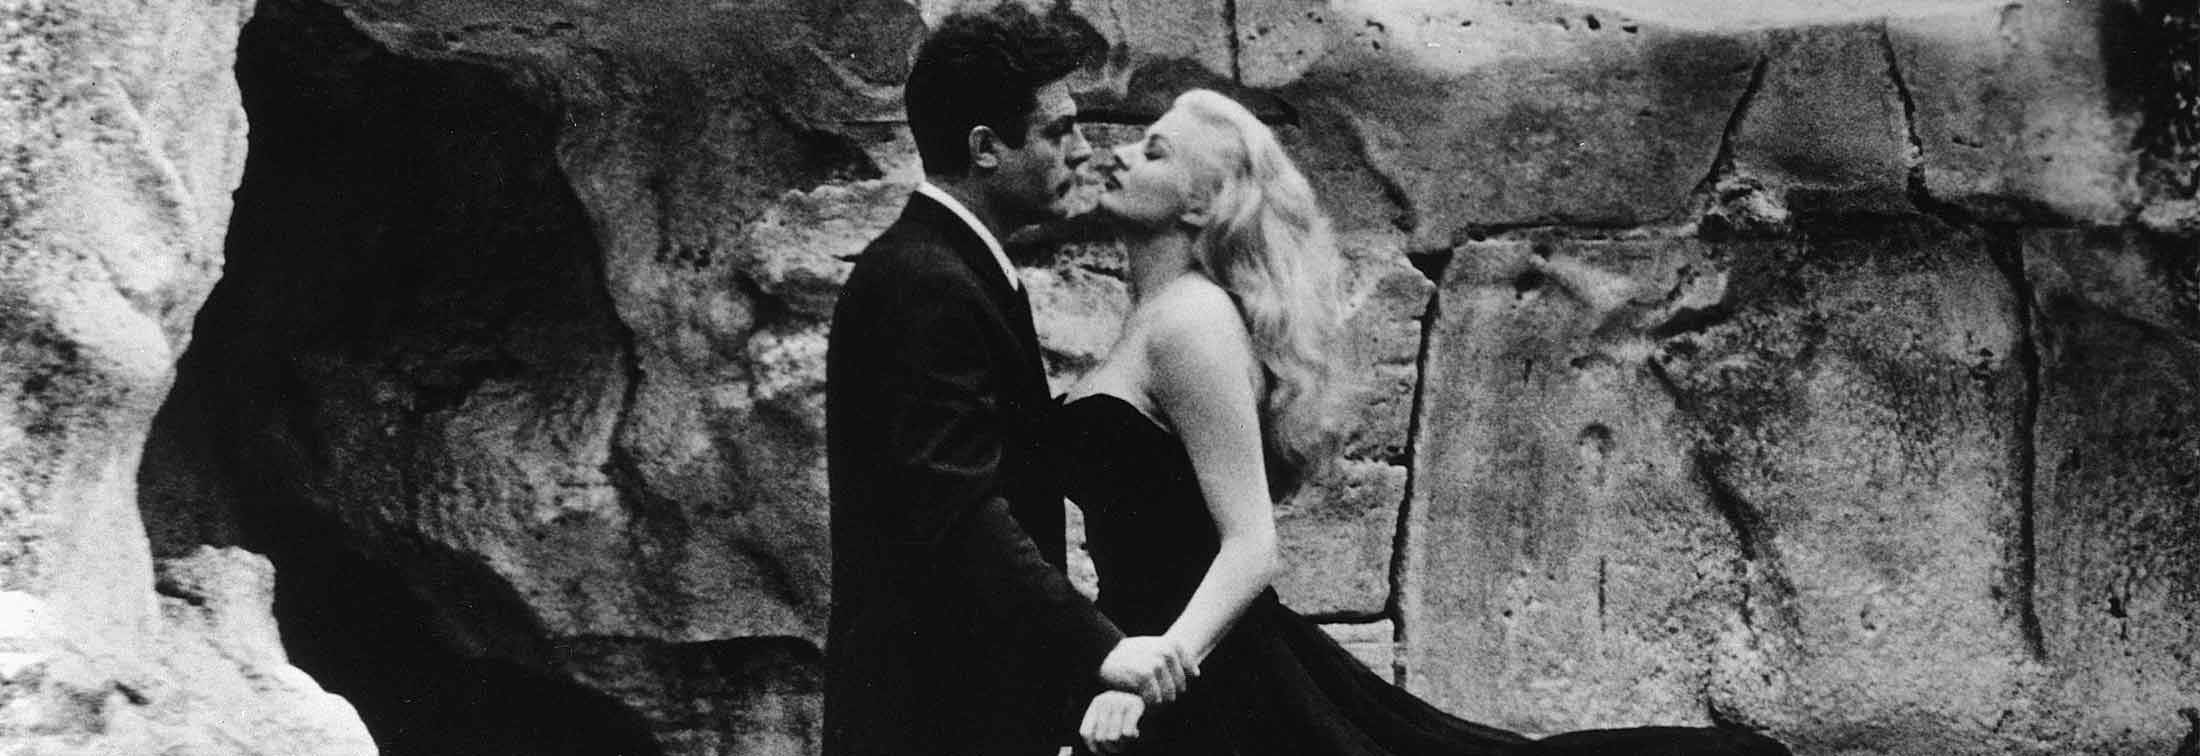 La Dolce Vita: Not as sweet as you'd think 60 years on